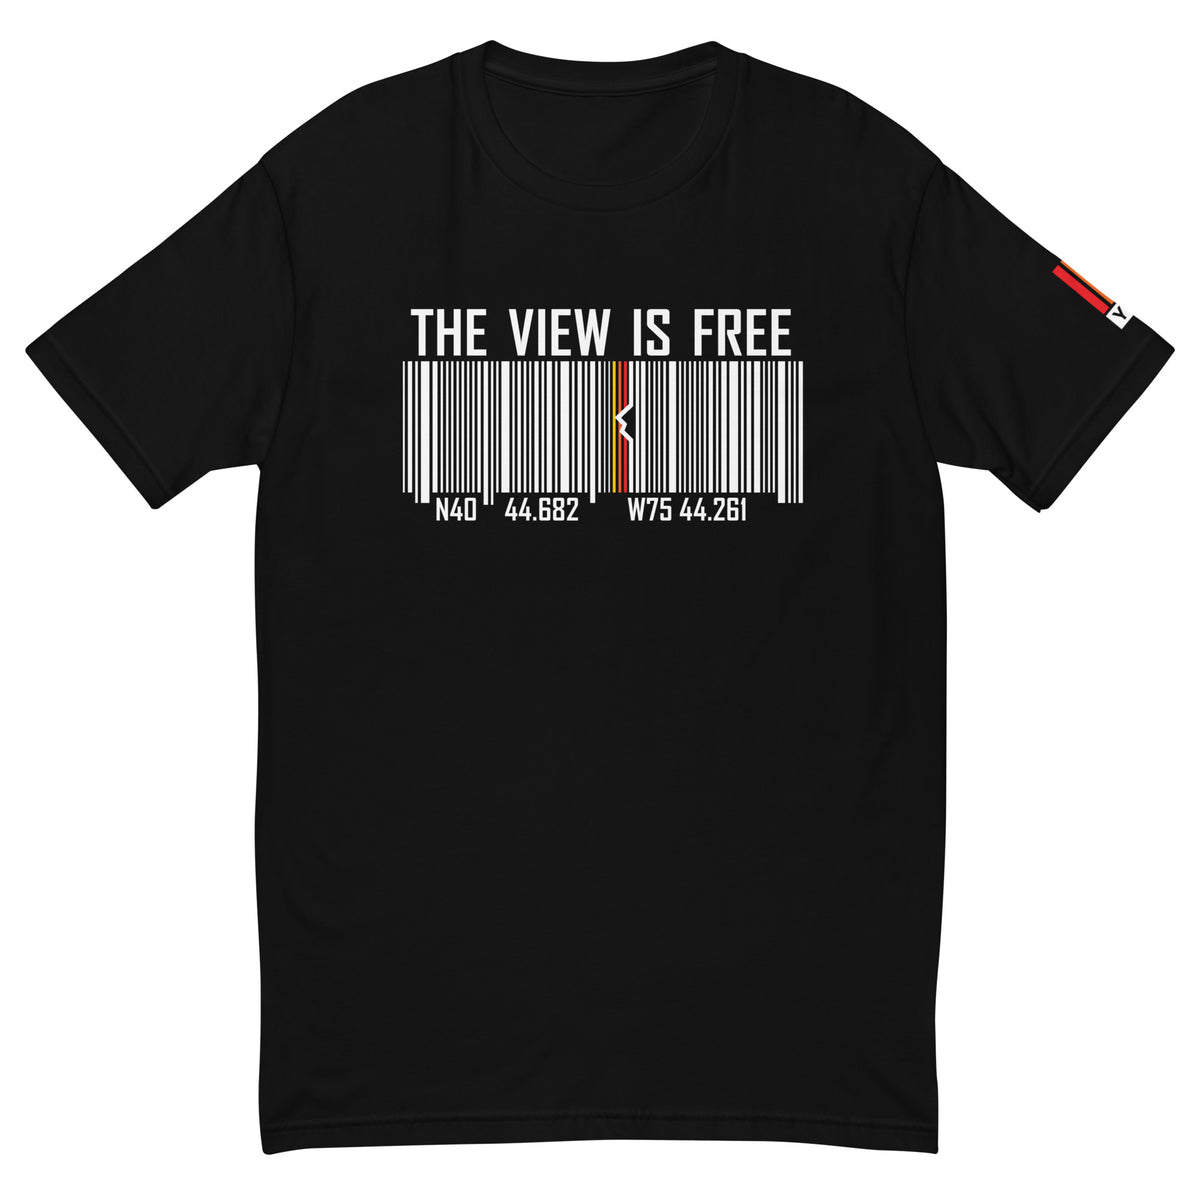 The View Is Free Tee